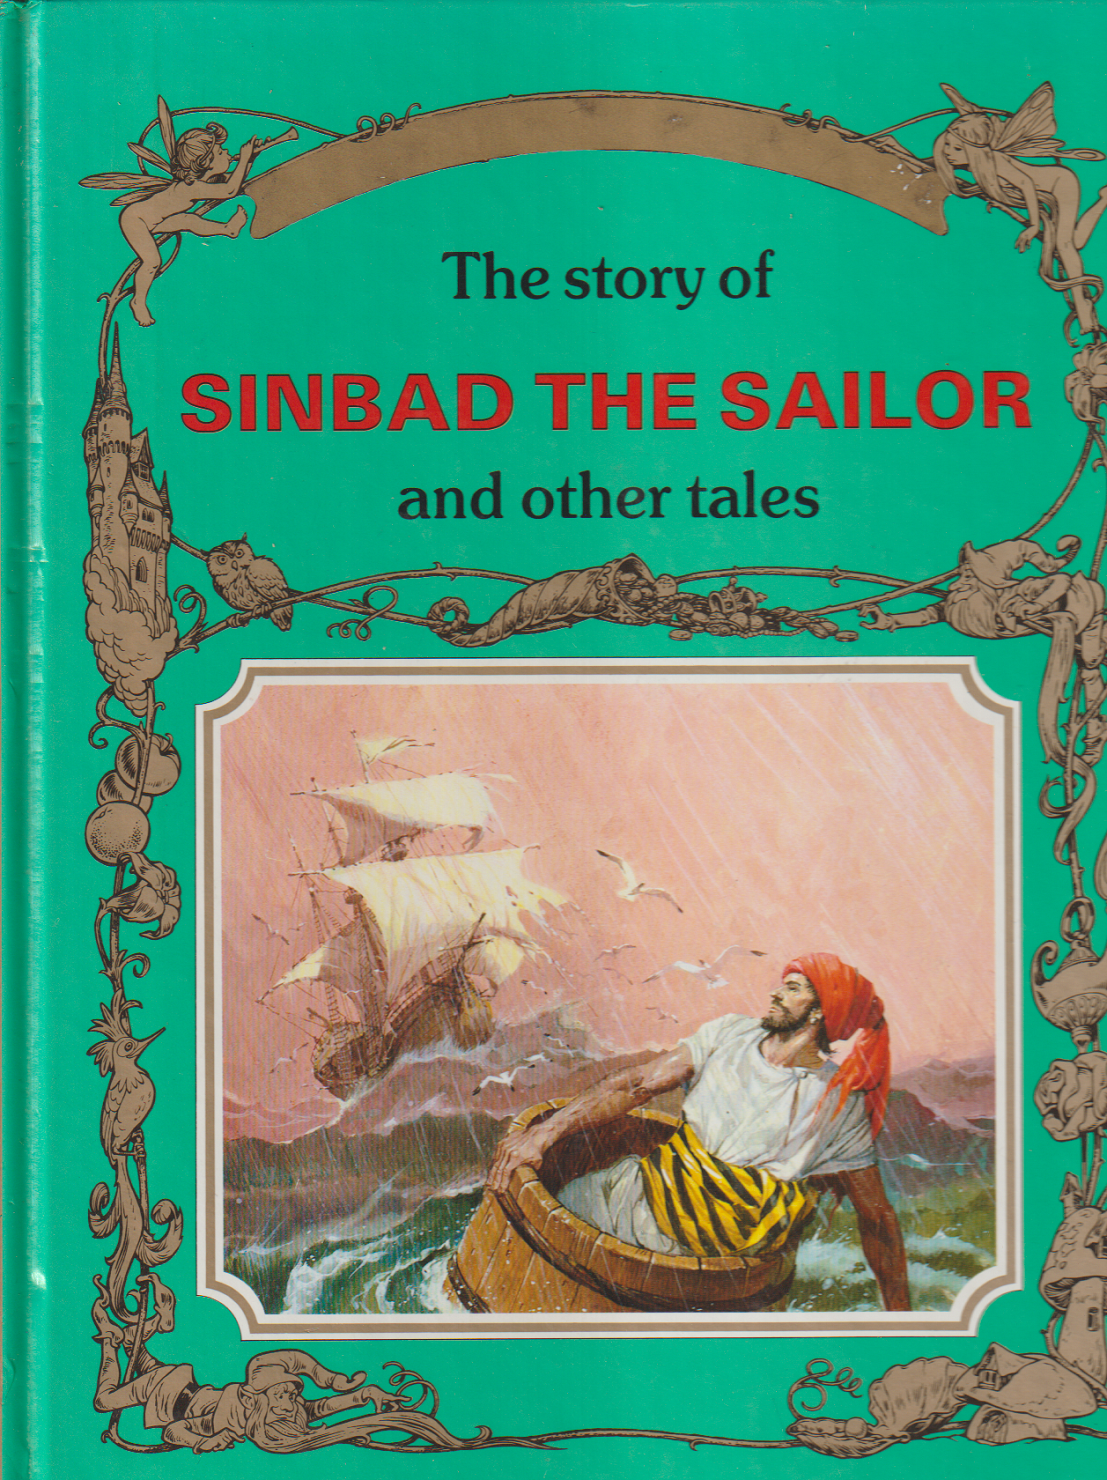 The story of Sinbad the sailor and other tales